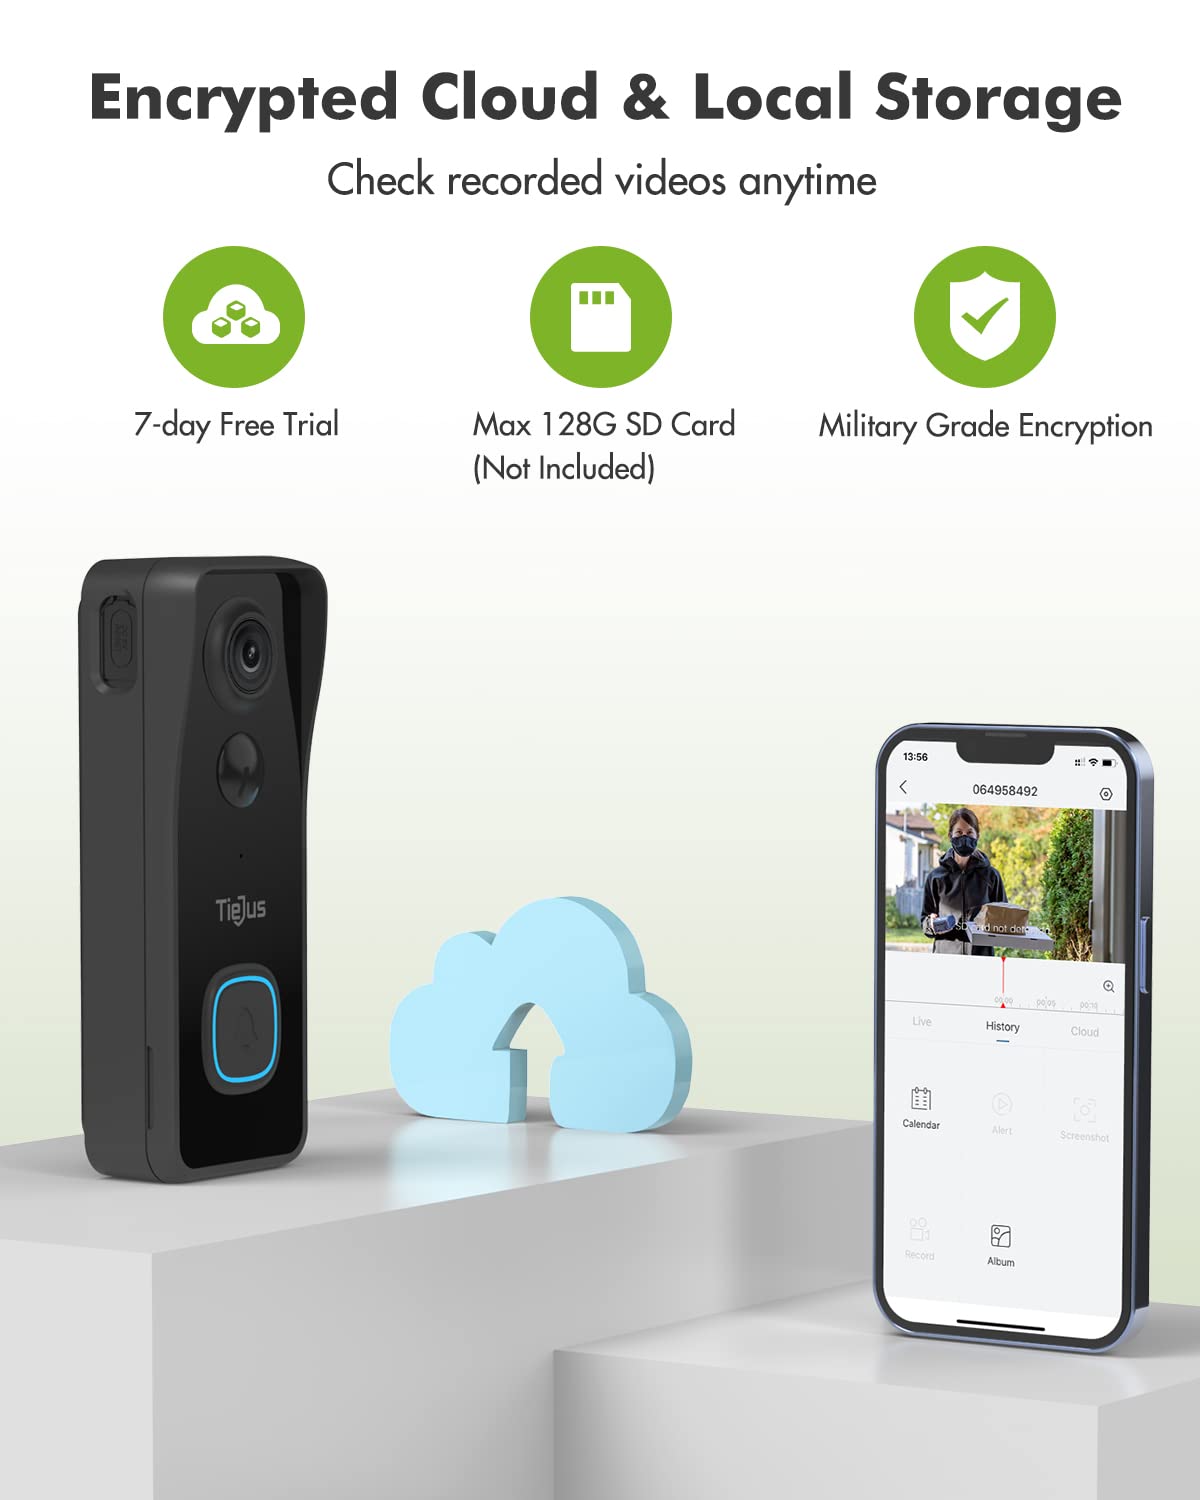 TieJus Doorbell Camera Wireless with Chime, Video Doorbell, 2 Way Audio, Voice Changer, Voice Message, PIR Motion Detection, Night Vision, SD & Cloud Storage, IP66 Waterproof, 2.4G WiFi